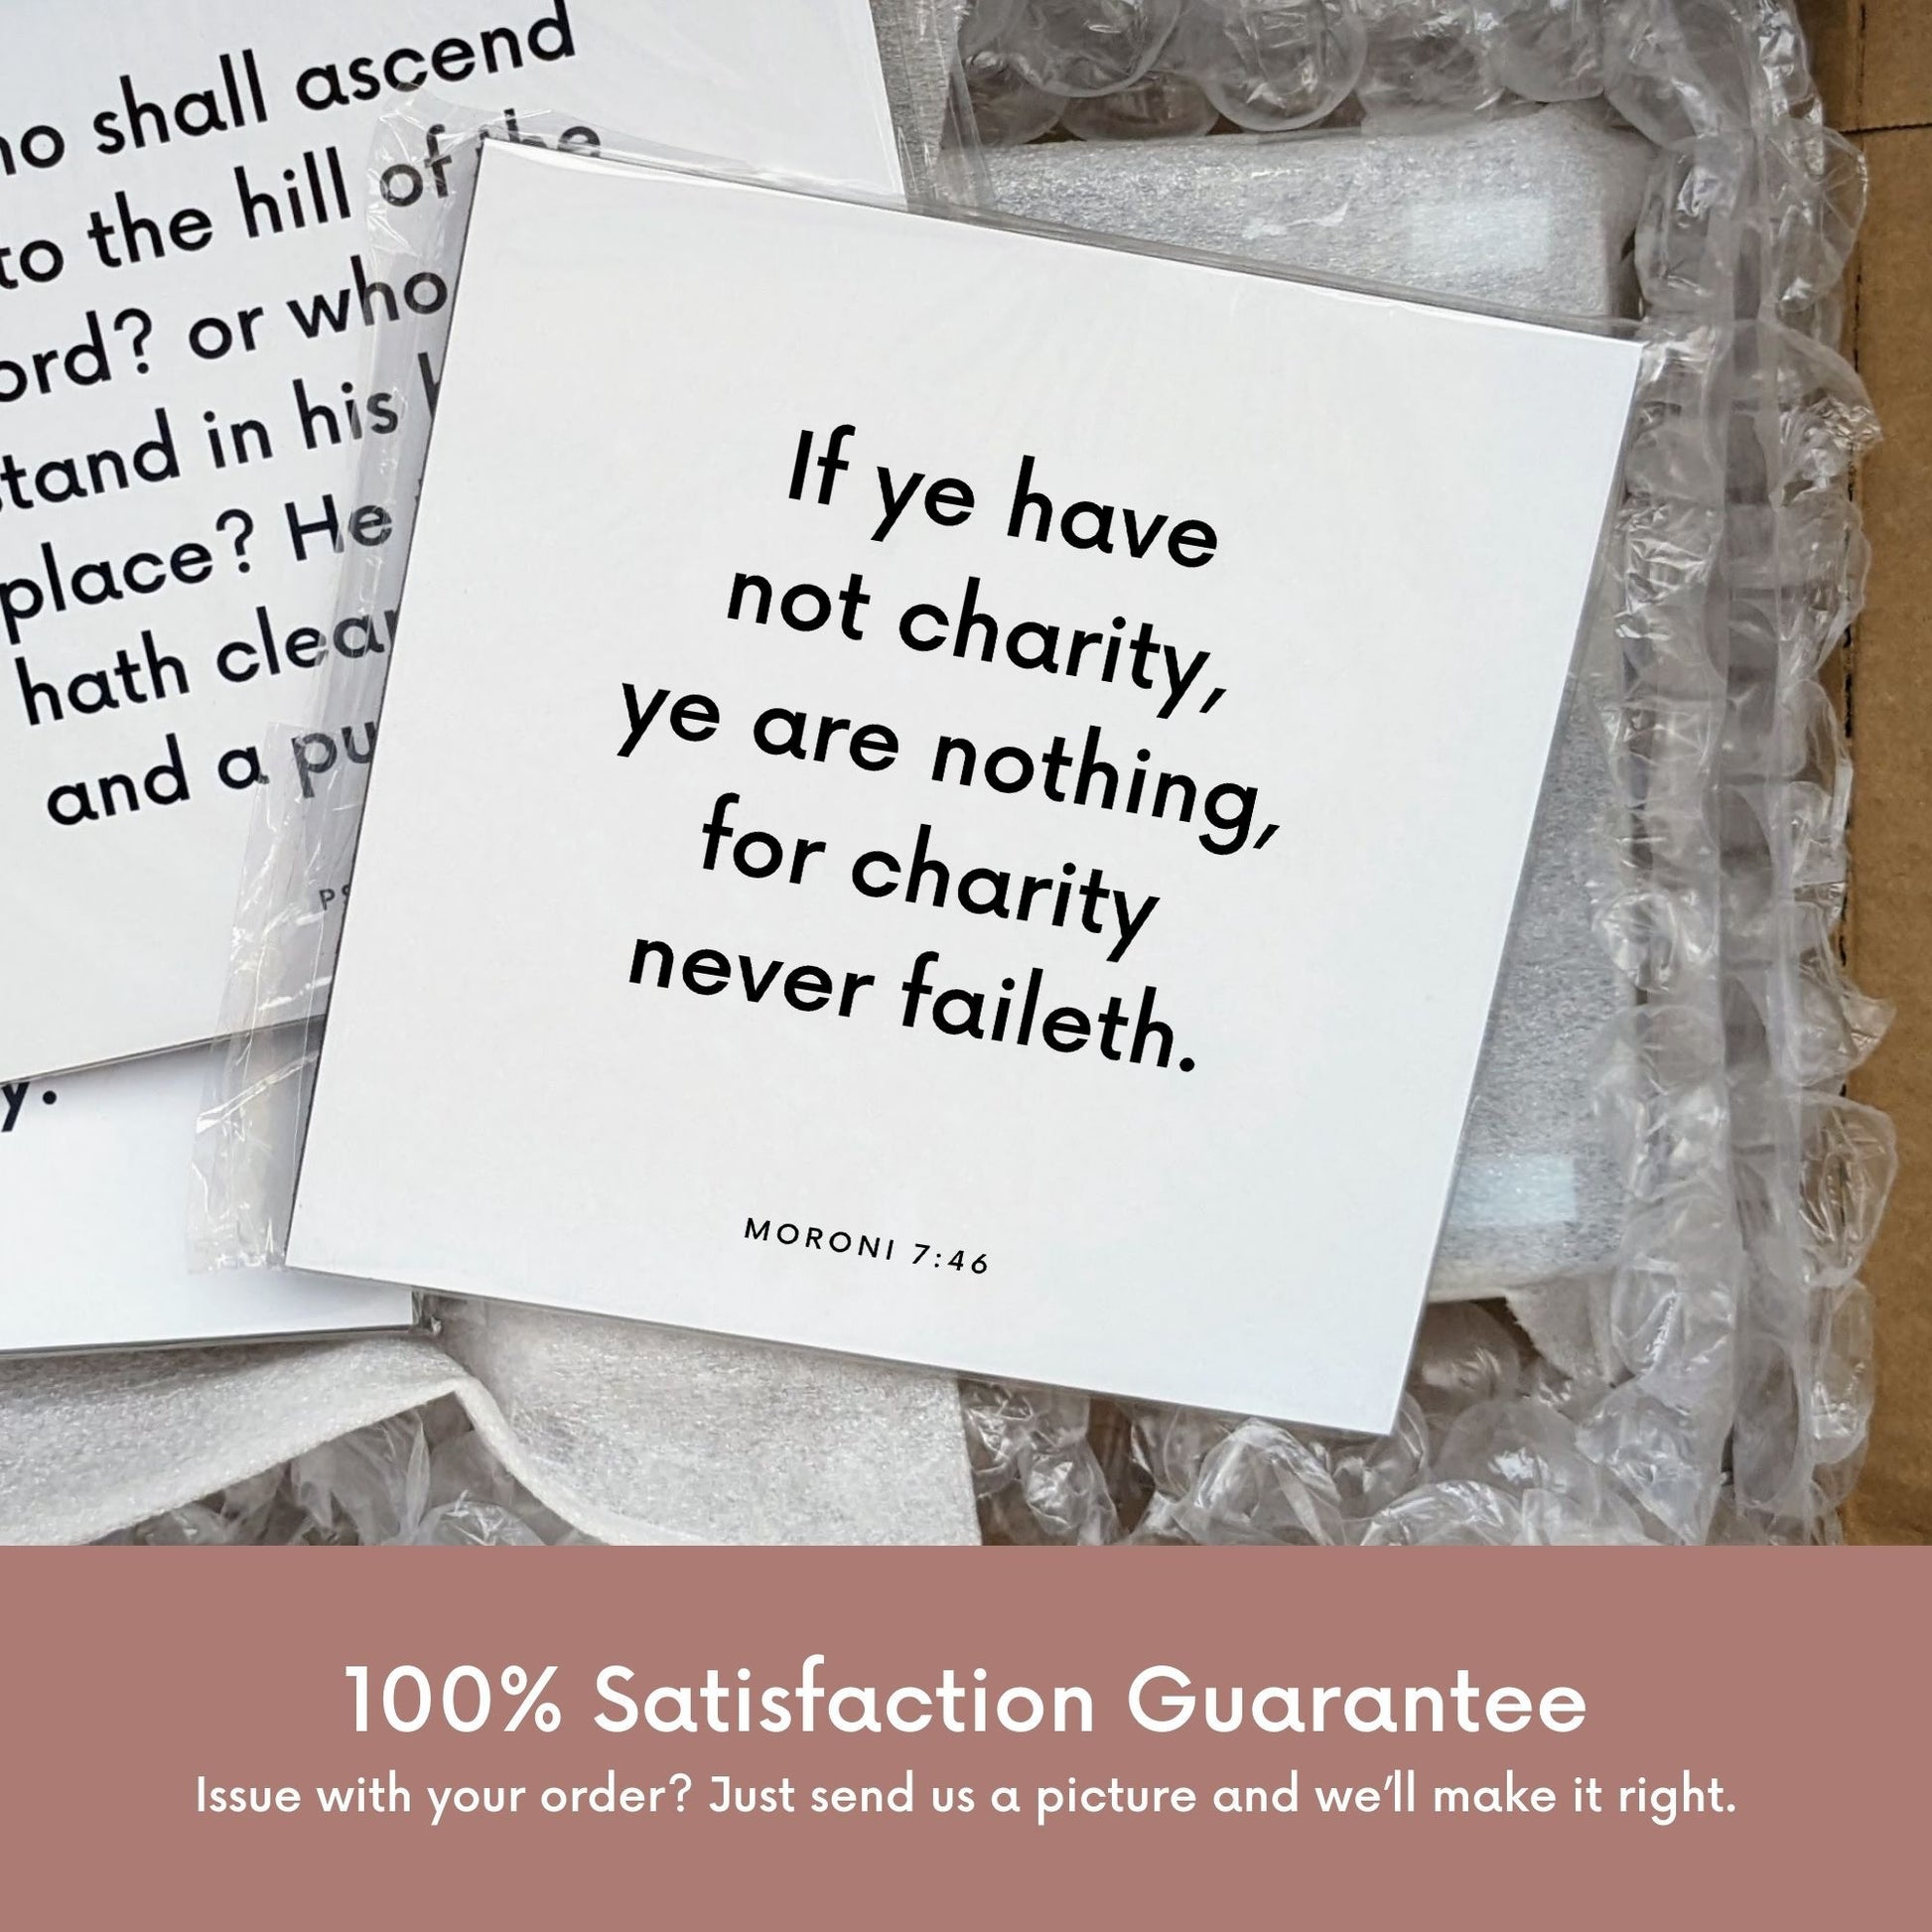 Shipping materials for scripture tile of Moroni 7:46 - "If ye have not charity, ye are nothing"